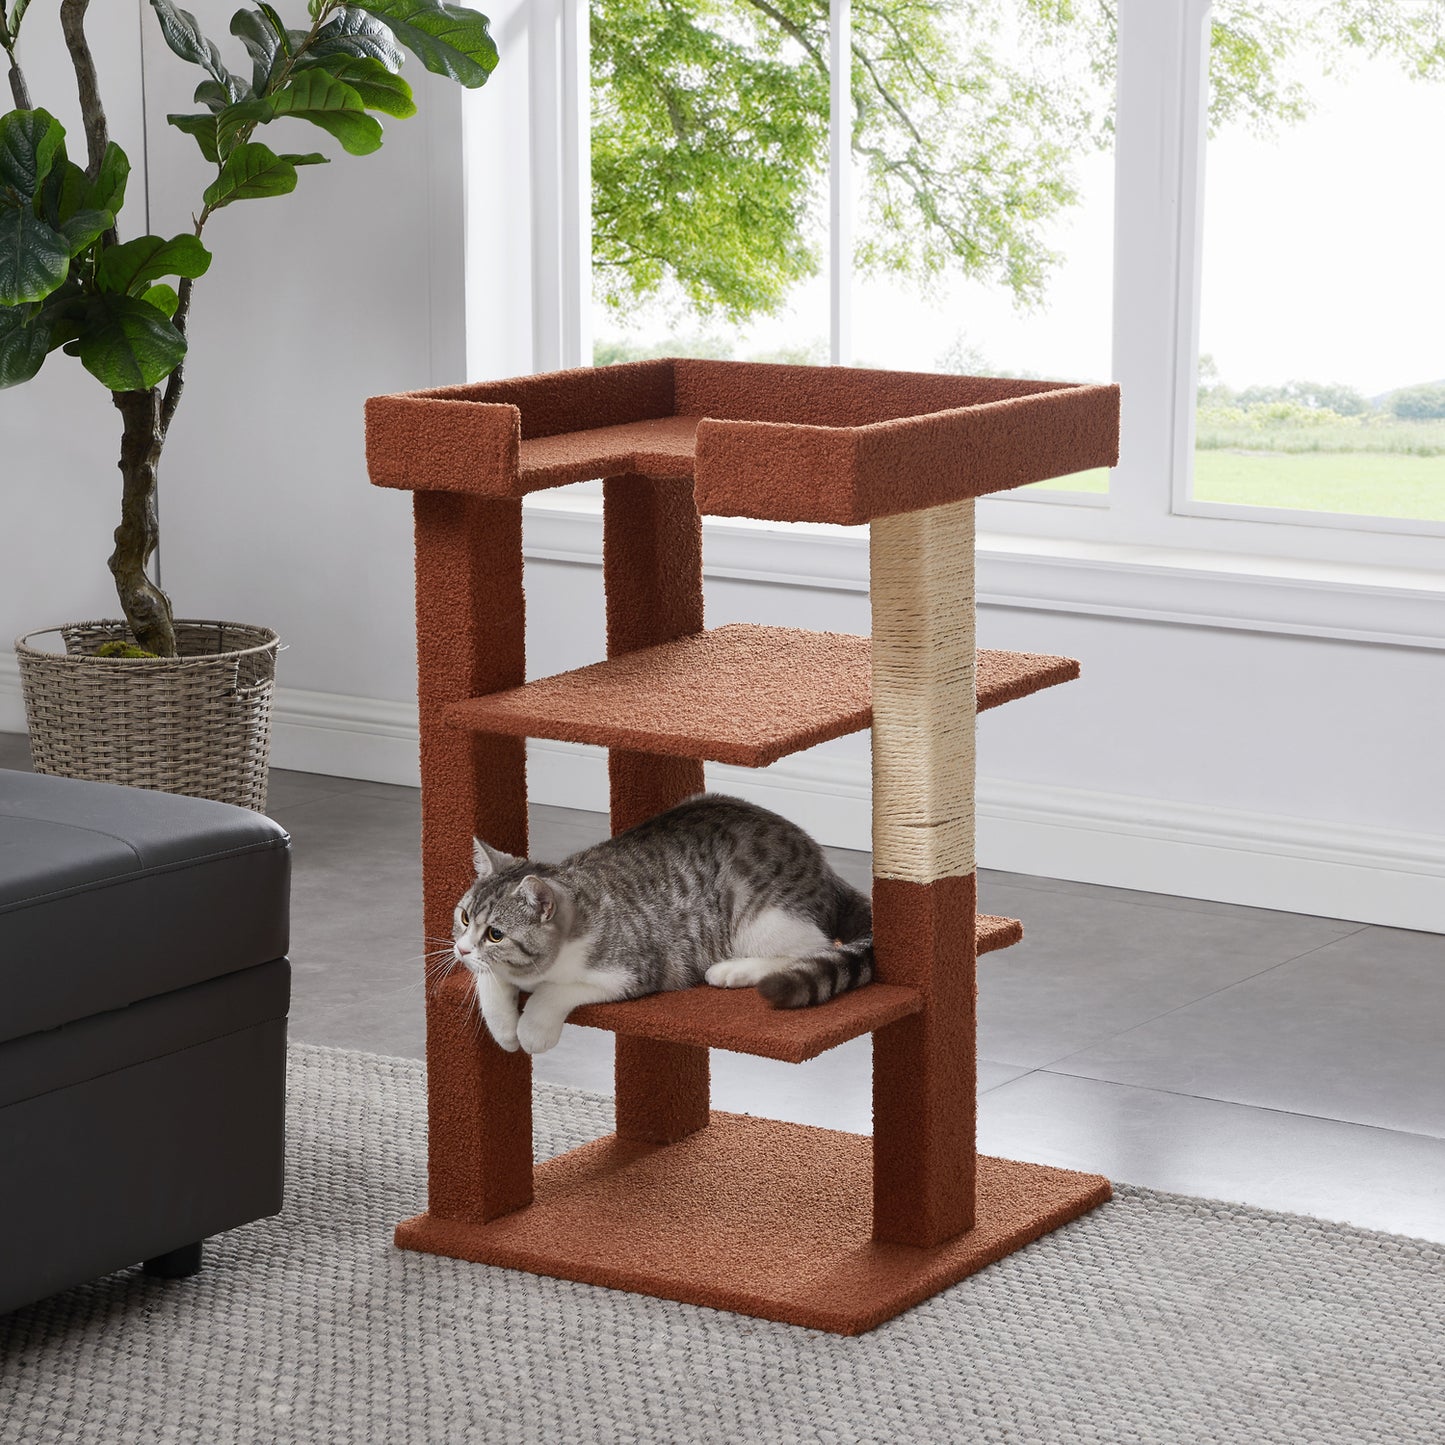 Naomi Home Multi-Level Cat Scratch Tower Wooden Furniture, Cat Home for Large, Small, Little Cats-Color: Beige